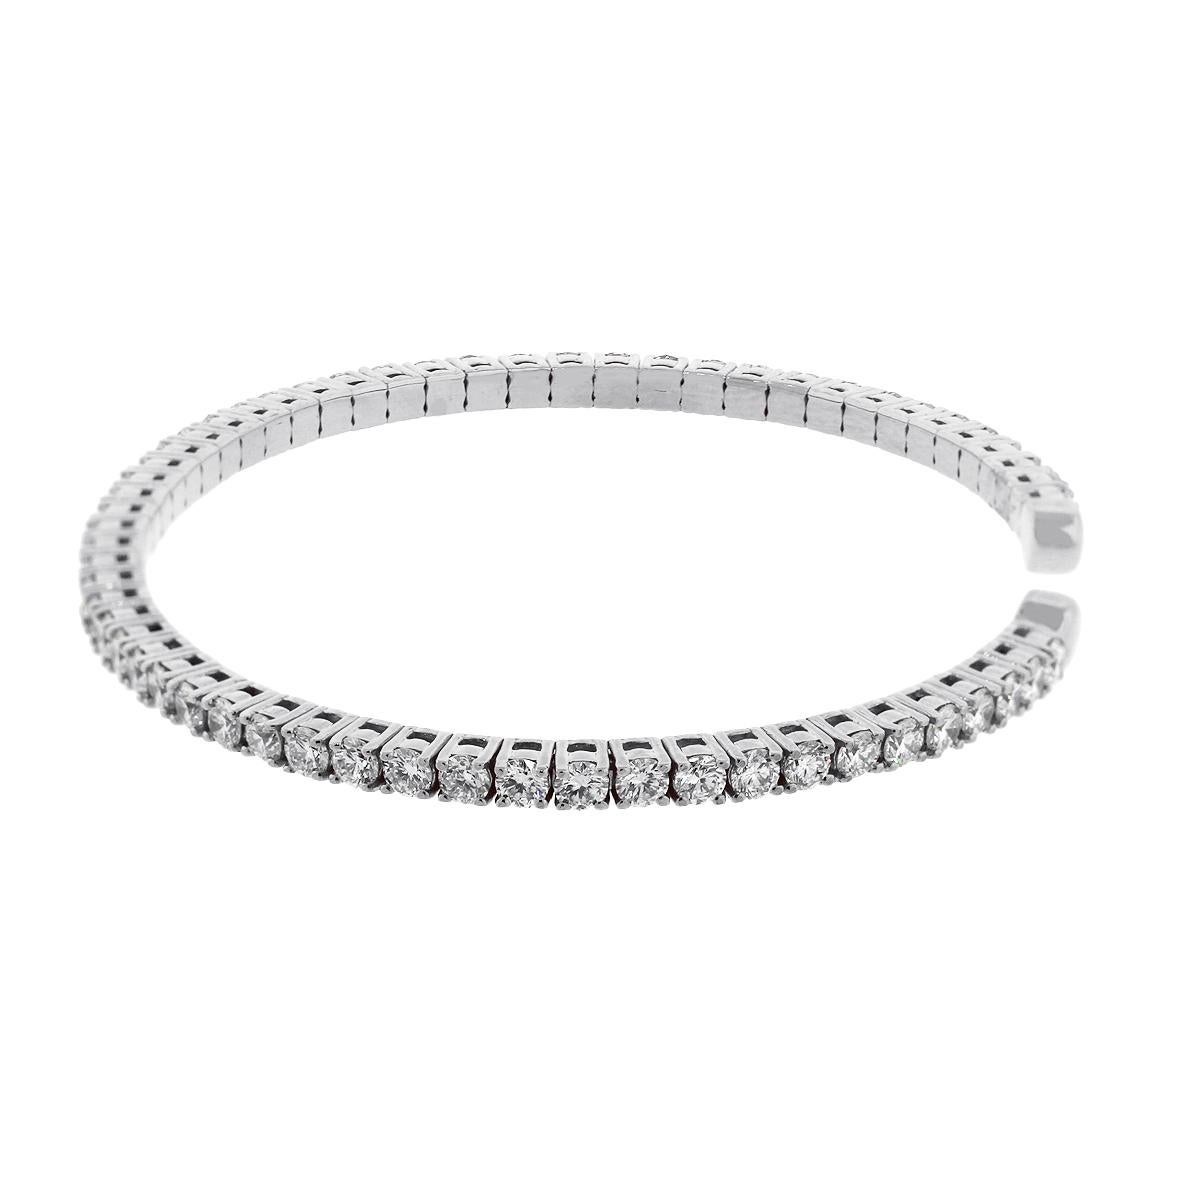 Style: Diamond Bangle
Material: 14k White Gold
Diamond Details: Approximately 2.60ctw of round brilliant diamonds. Diamonds are G/H in color and VS in clarity.
Total Weight: 8.9g (5.7dwt)
Bracelet Measurements: Will fit a 6″ Wrist
SKU: A30311892